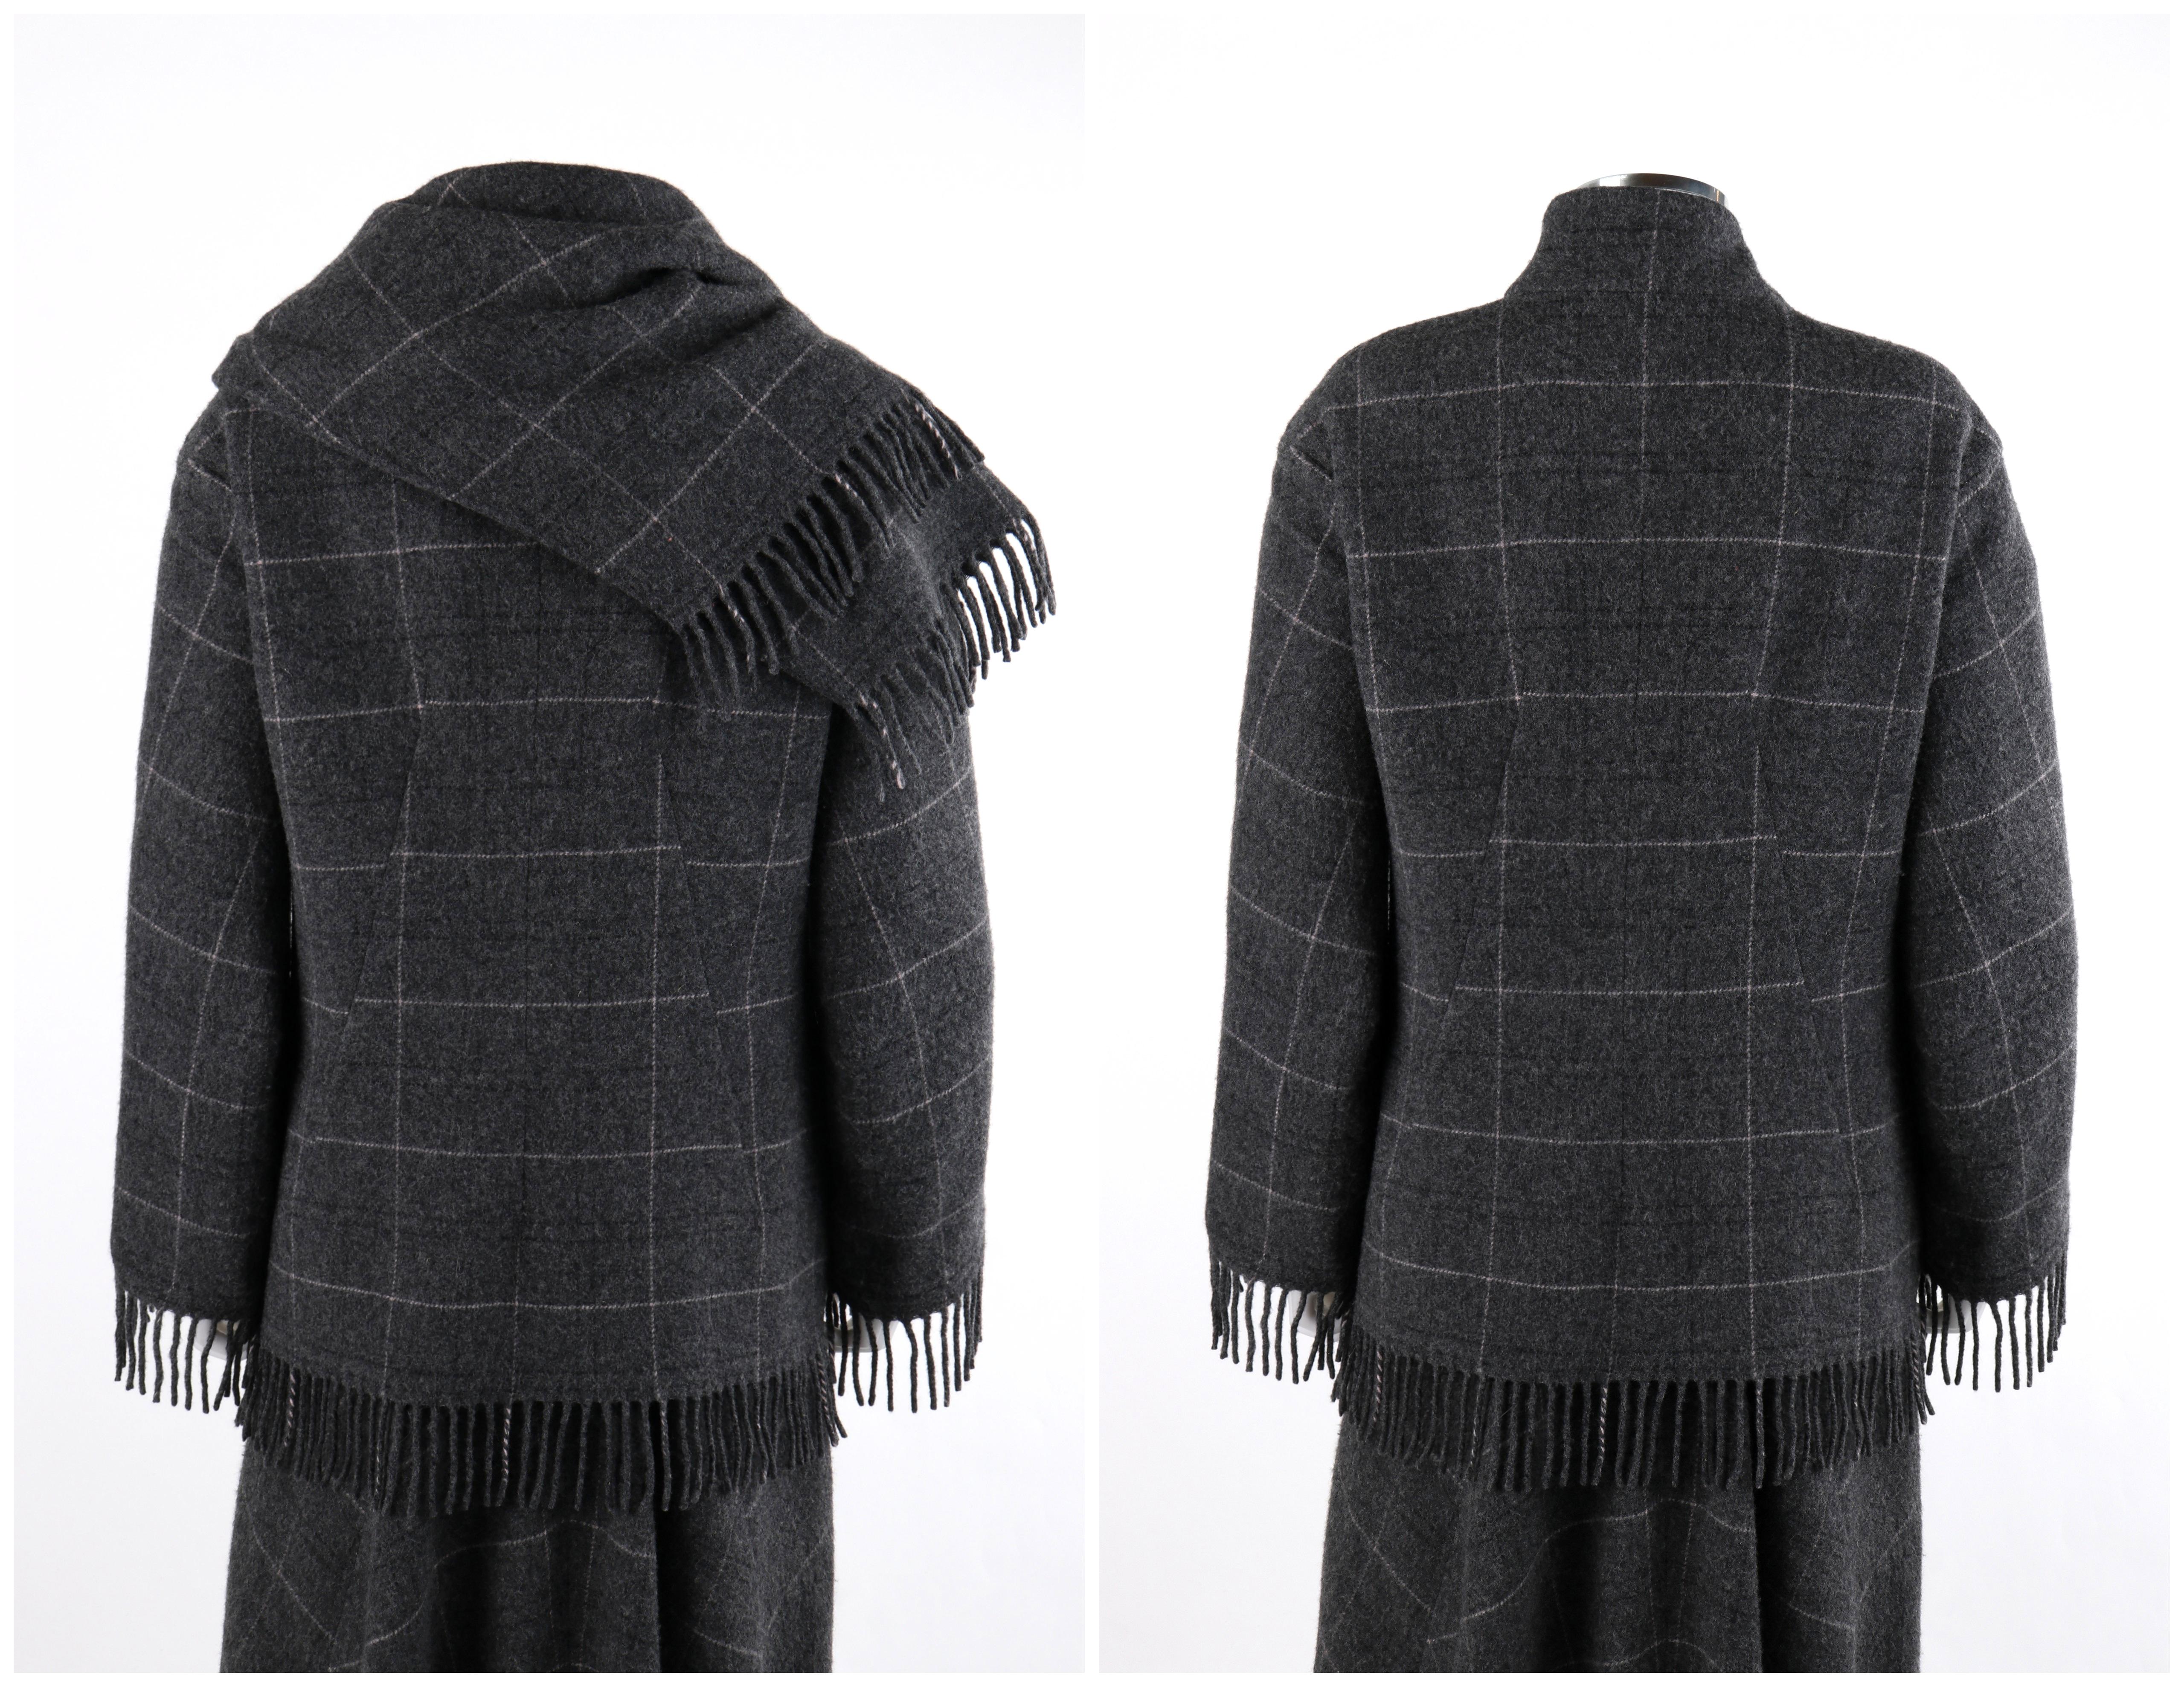 ALEXANDER McQUEEN A/W 1999 “The Overlook” Gray Check Fringe Jacket Skirt Set For Sale 1